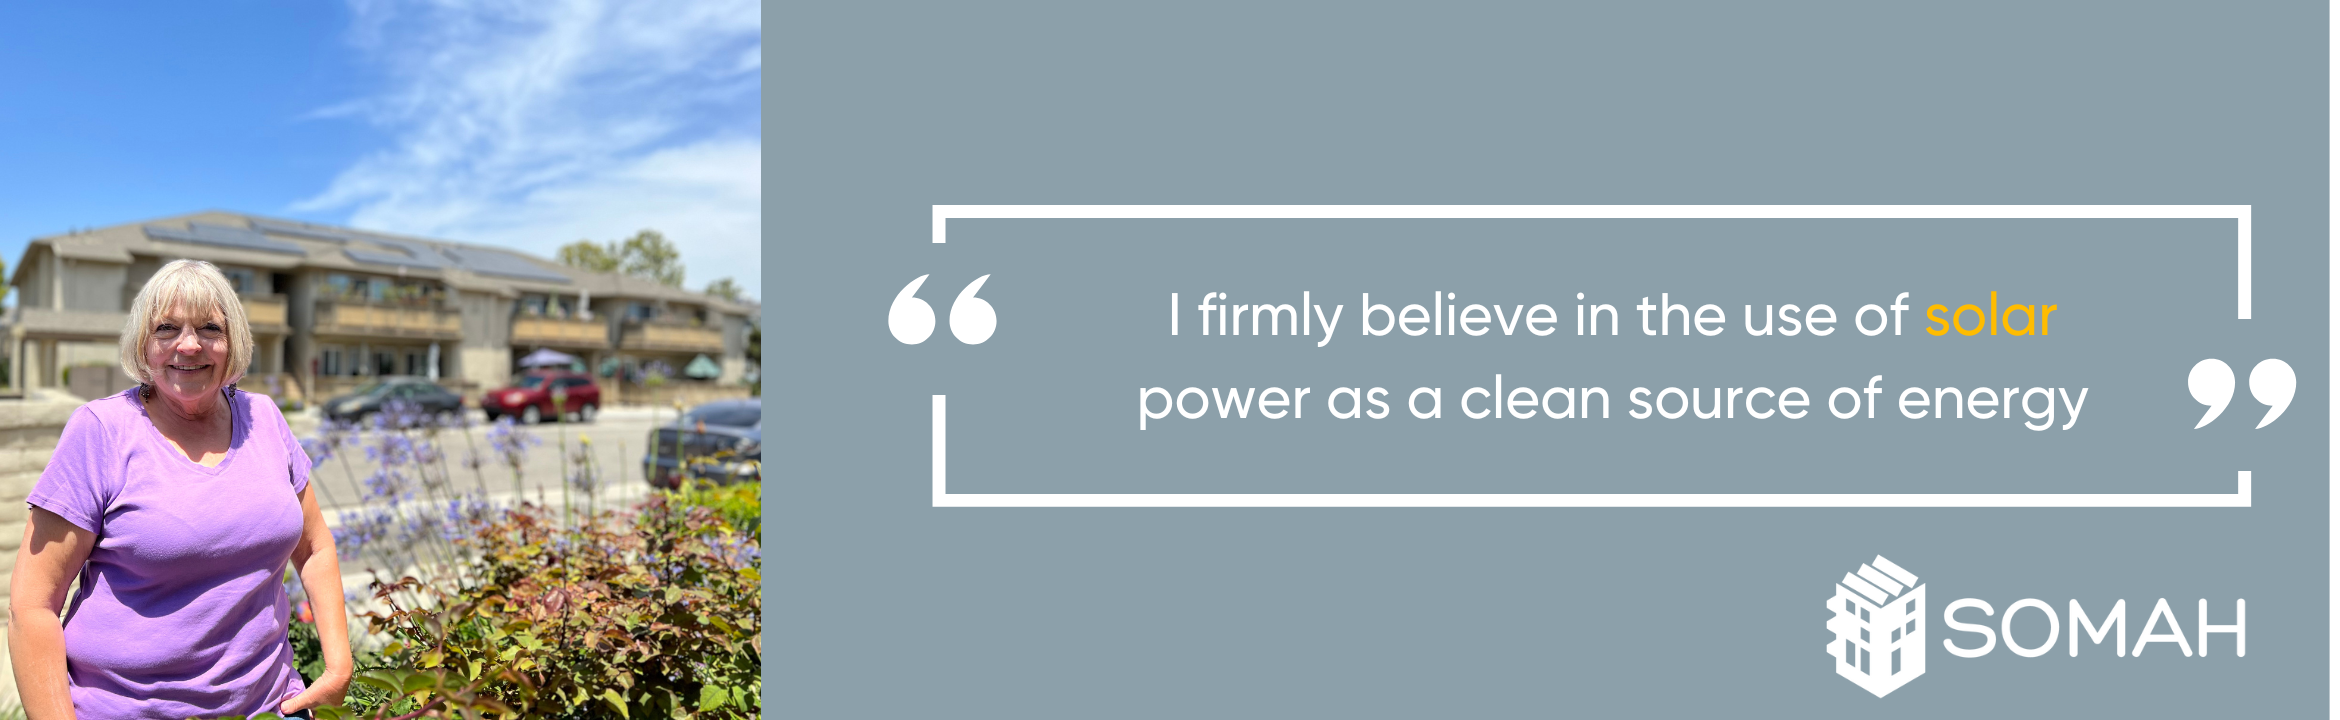 Quote: "I firmly believe in the use of solar power as a clean source of energy"